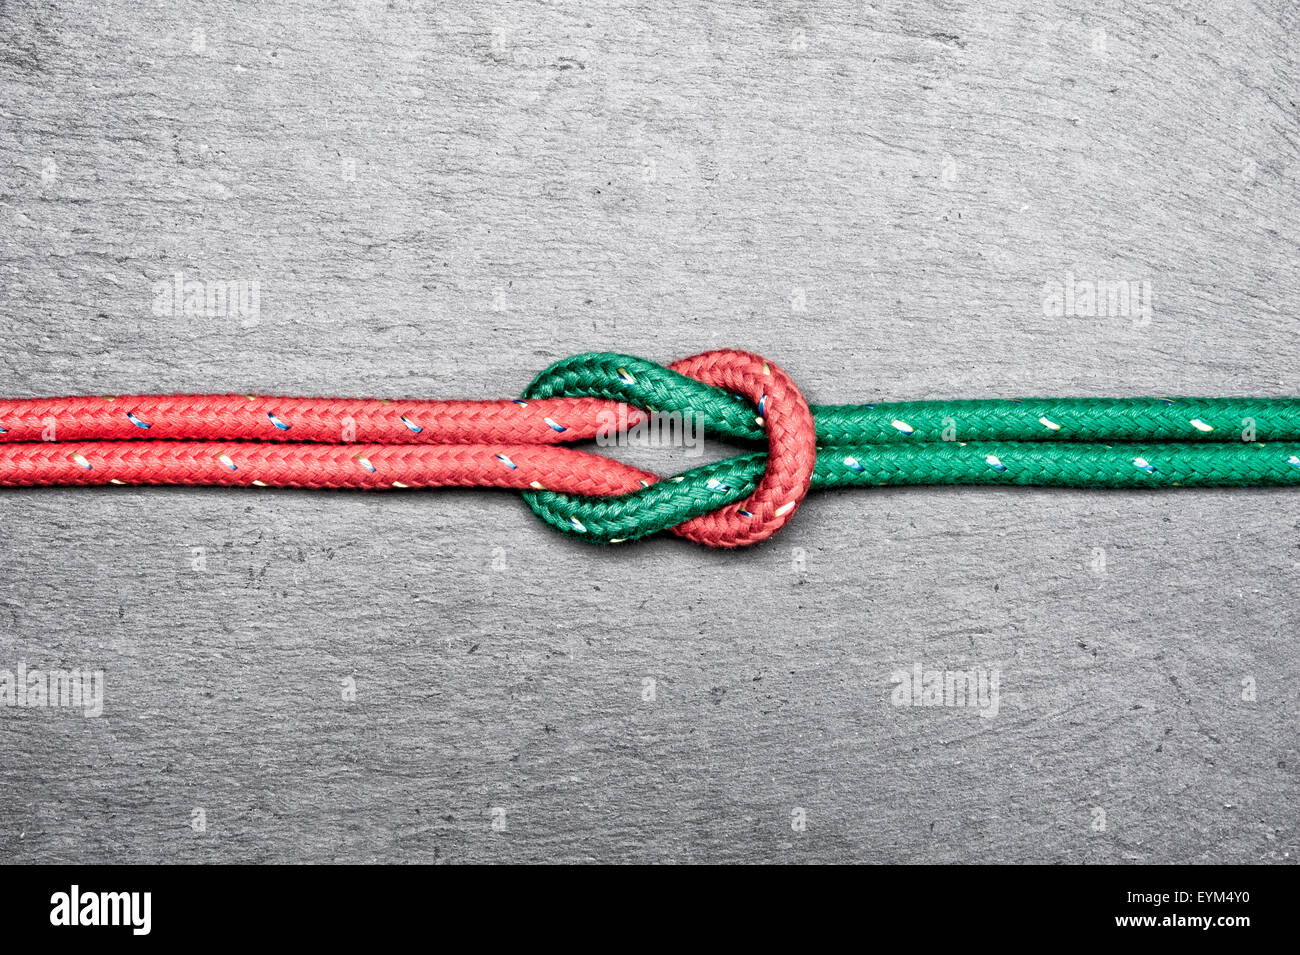 Ropes, rope, cross knot, red, green, Stock Photo